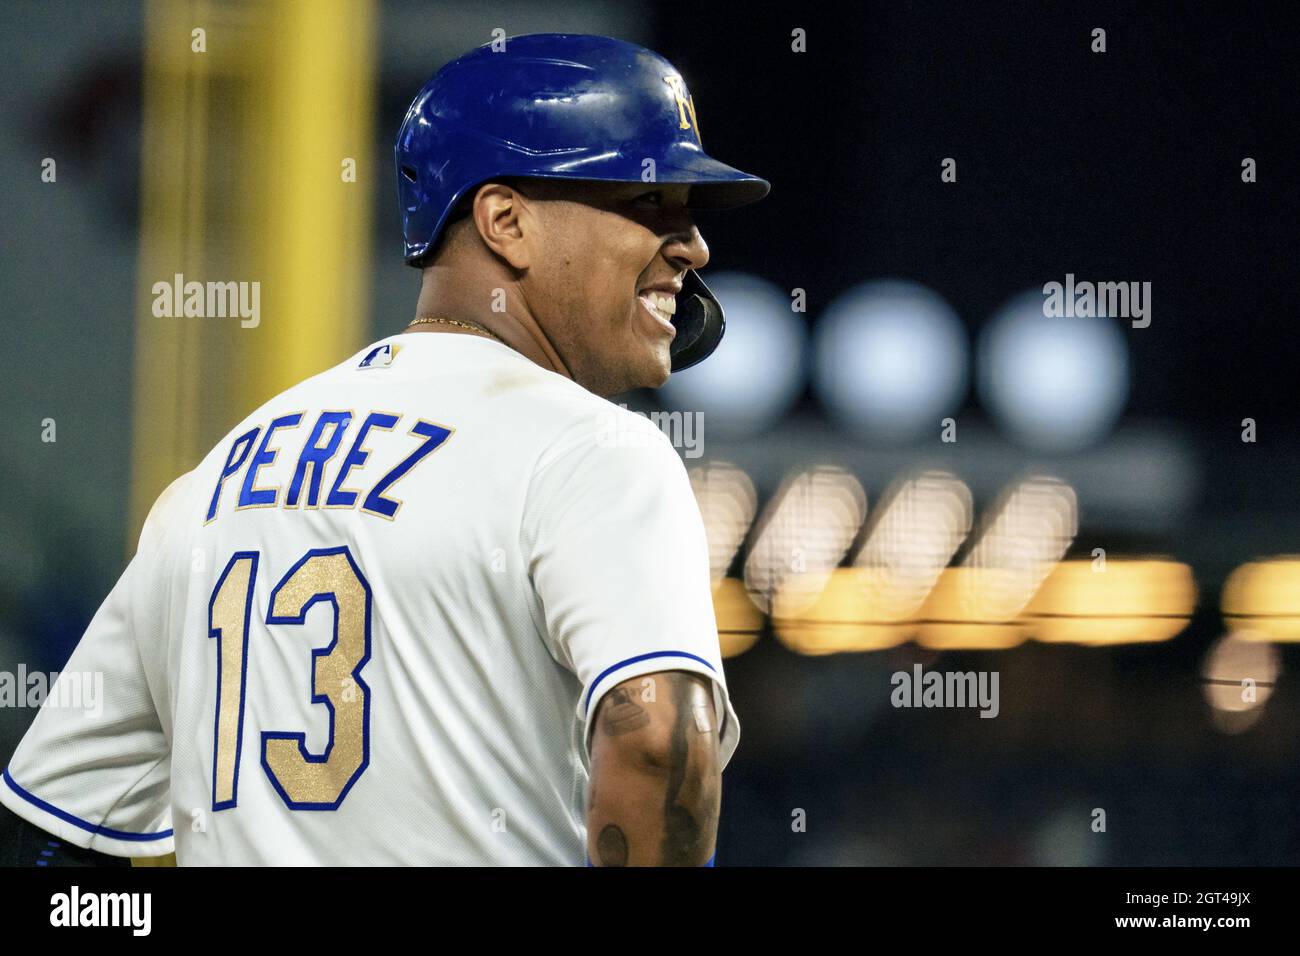 Royals 4, Twins 3: Salvador Perez mashes two homers - Twinkie Town